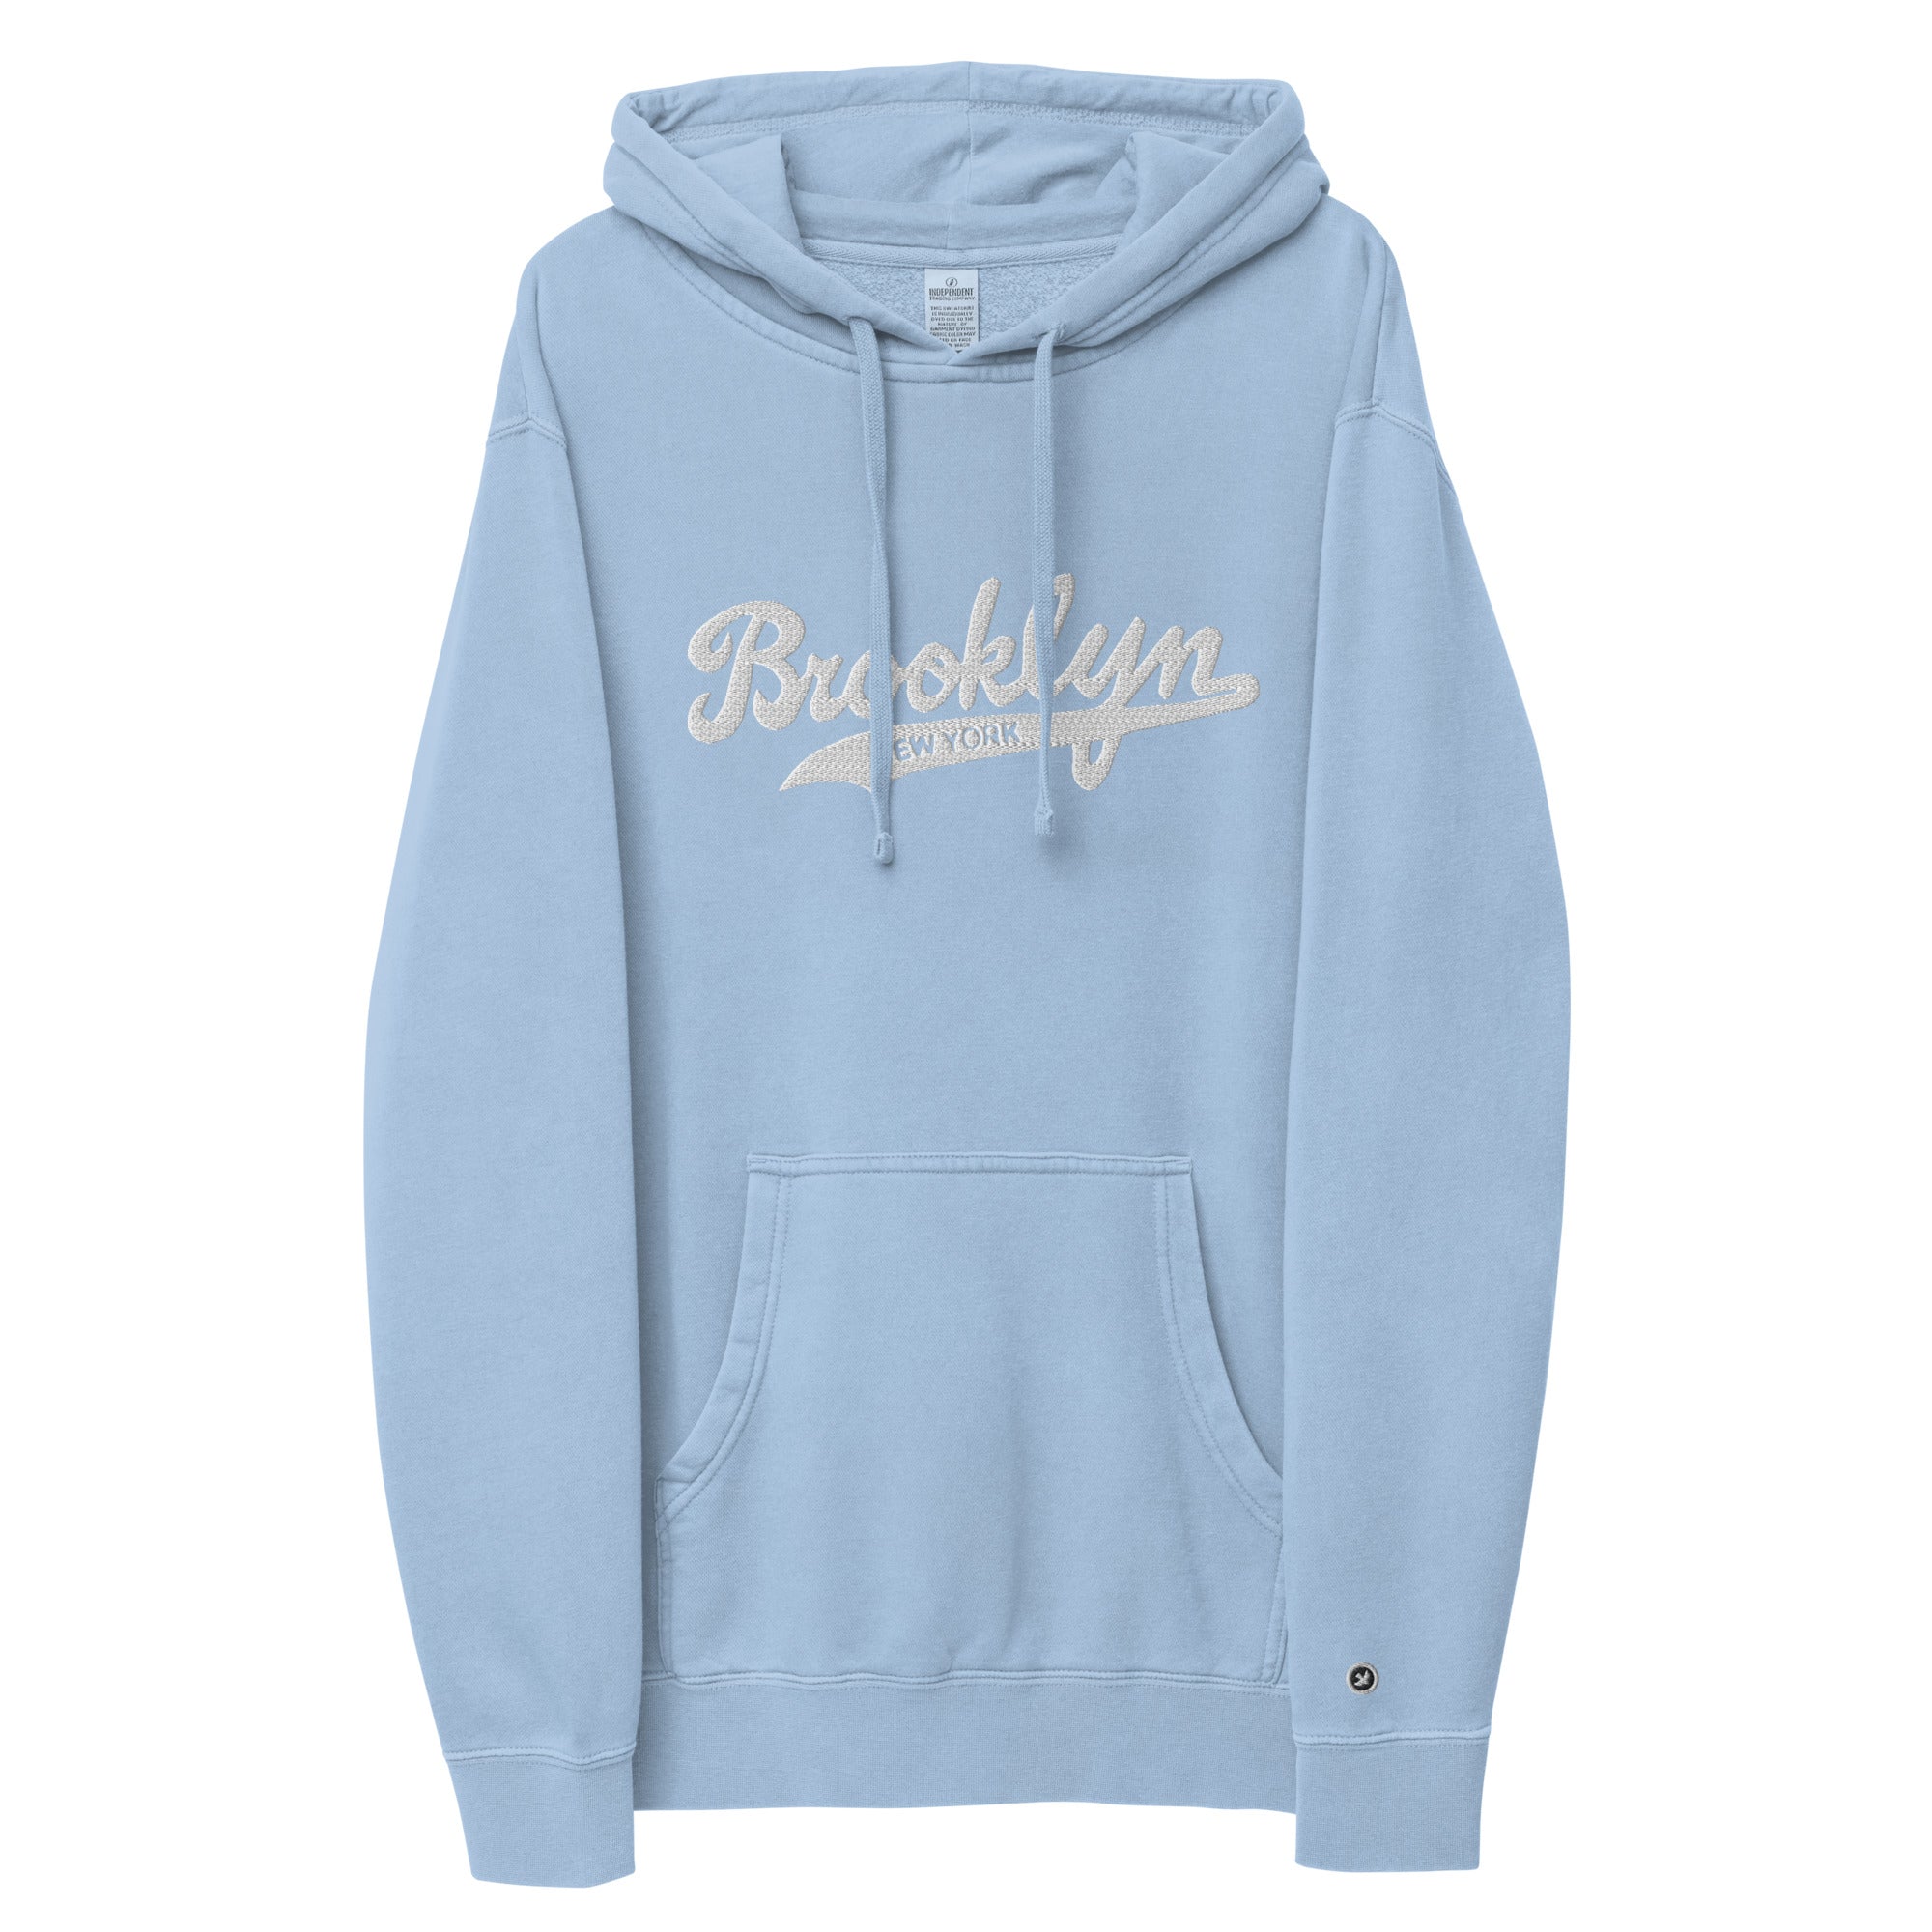 BROOKLYN EMBRODERY pigment-dyed hoodie